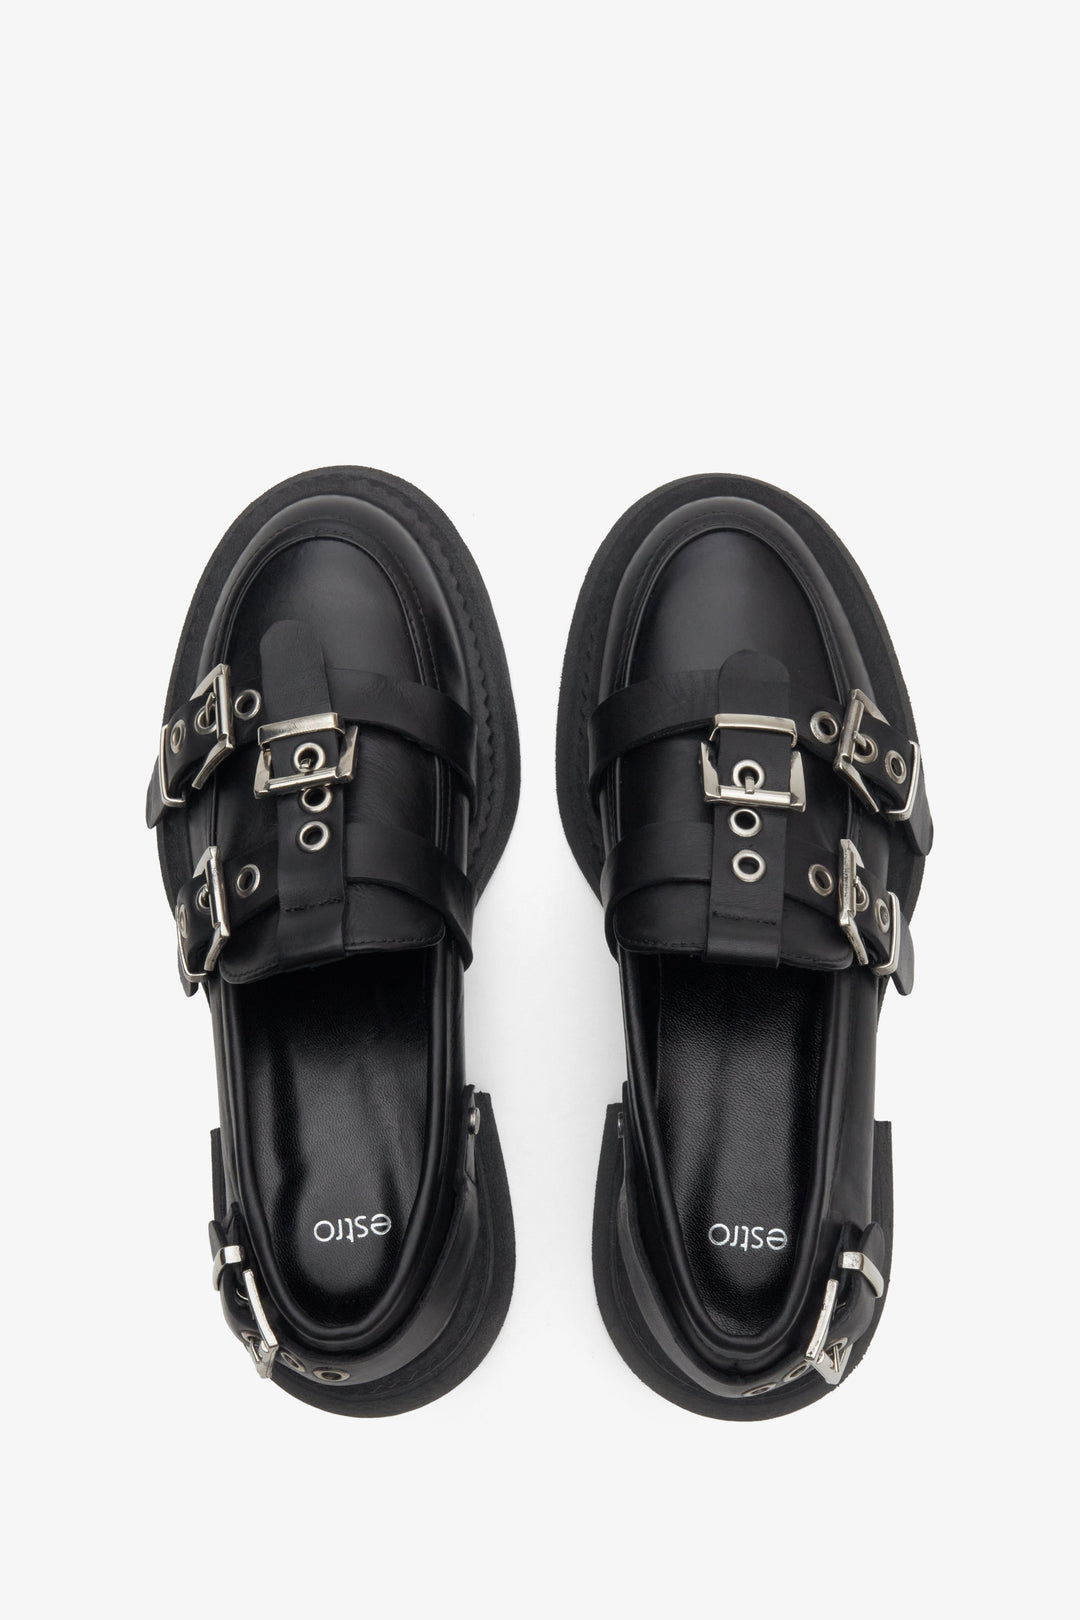  Women's black leather loafers with embellishments by Estro - top view presentation of the model.